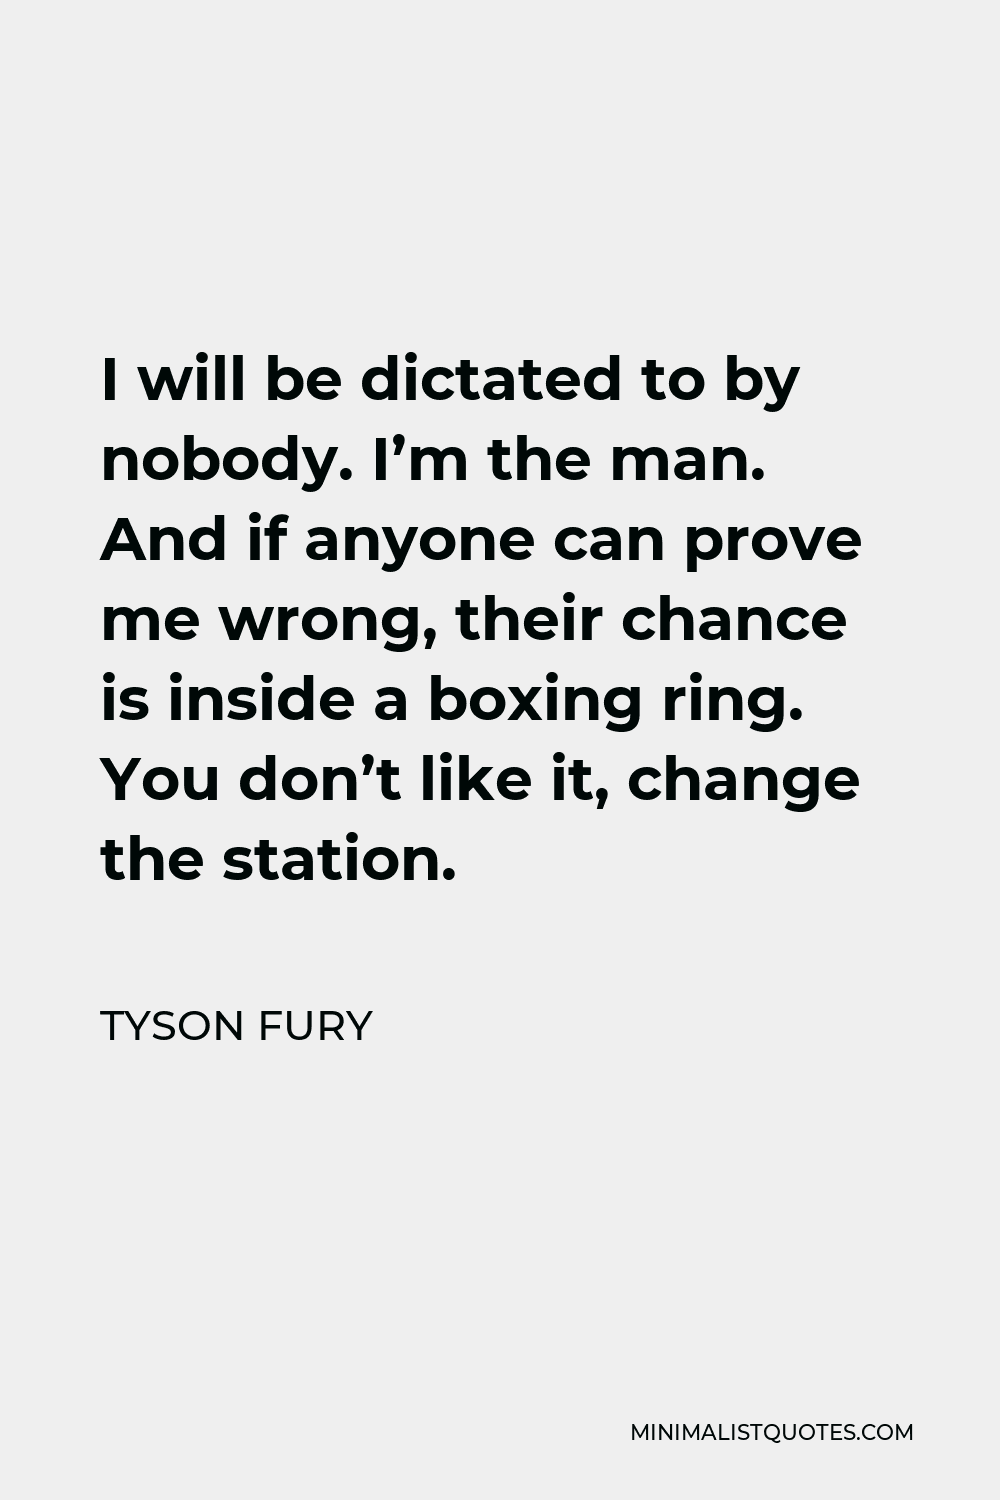 Tyson Fury Quote - I will be dictated to by nobody. I’m the man. And if anyone can prove me wrong, their chance is inside a boxing ring. You don’t like it, change the station.